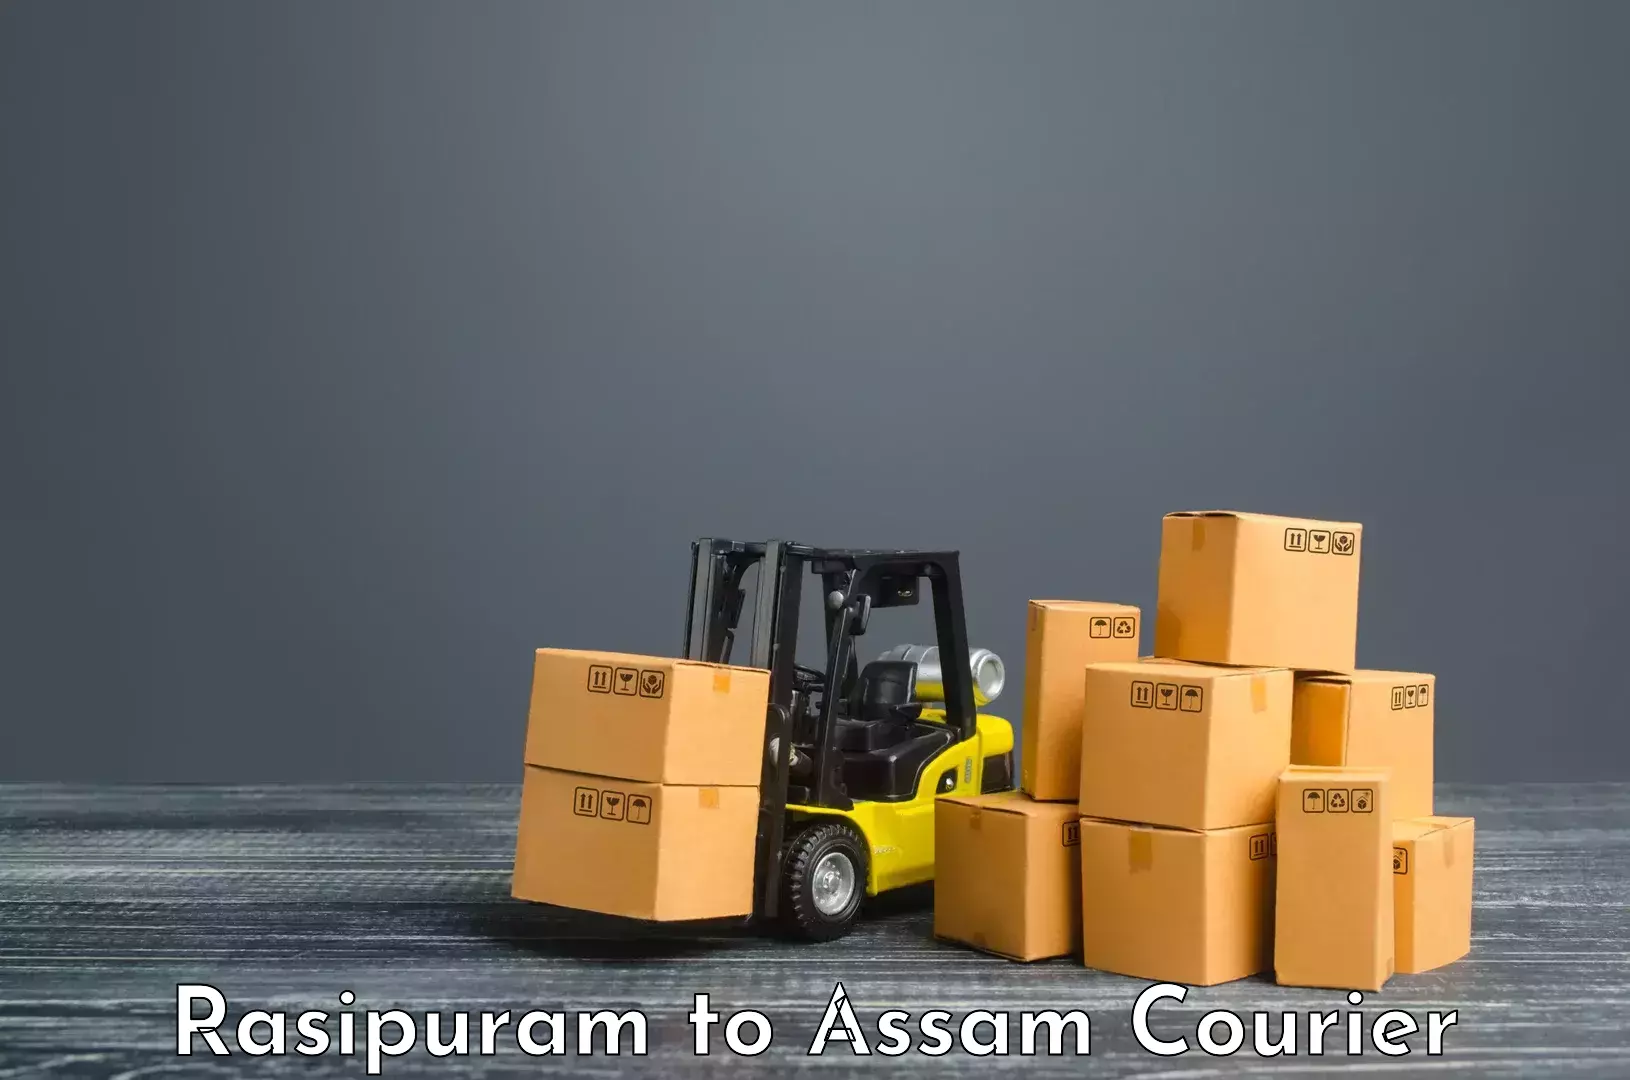 State-of-the-art courier technology Rasipuram to Demow